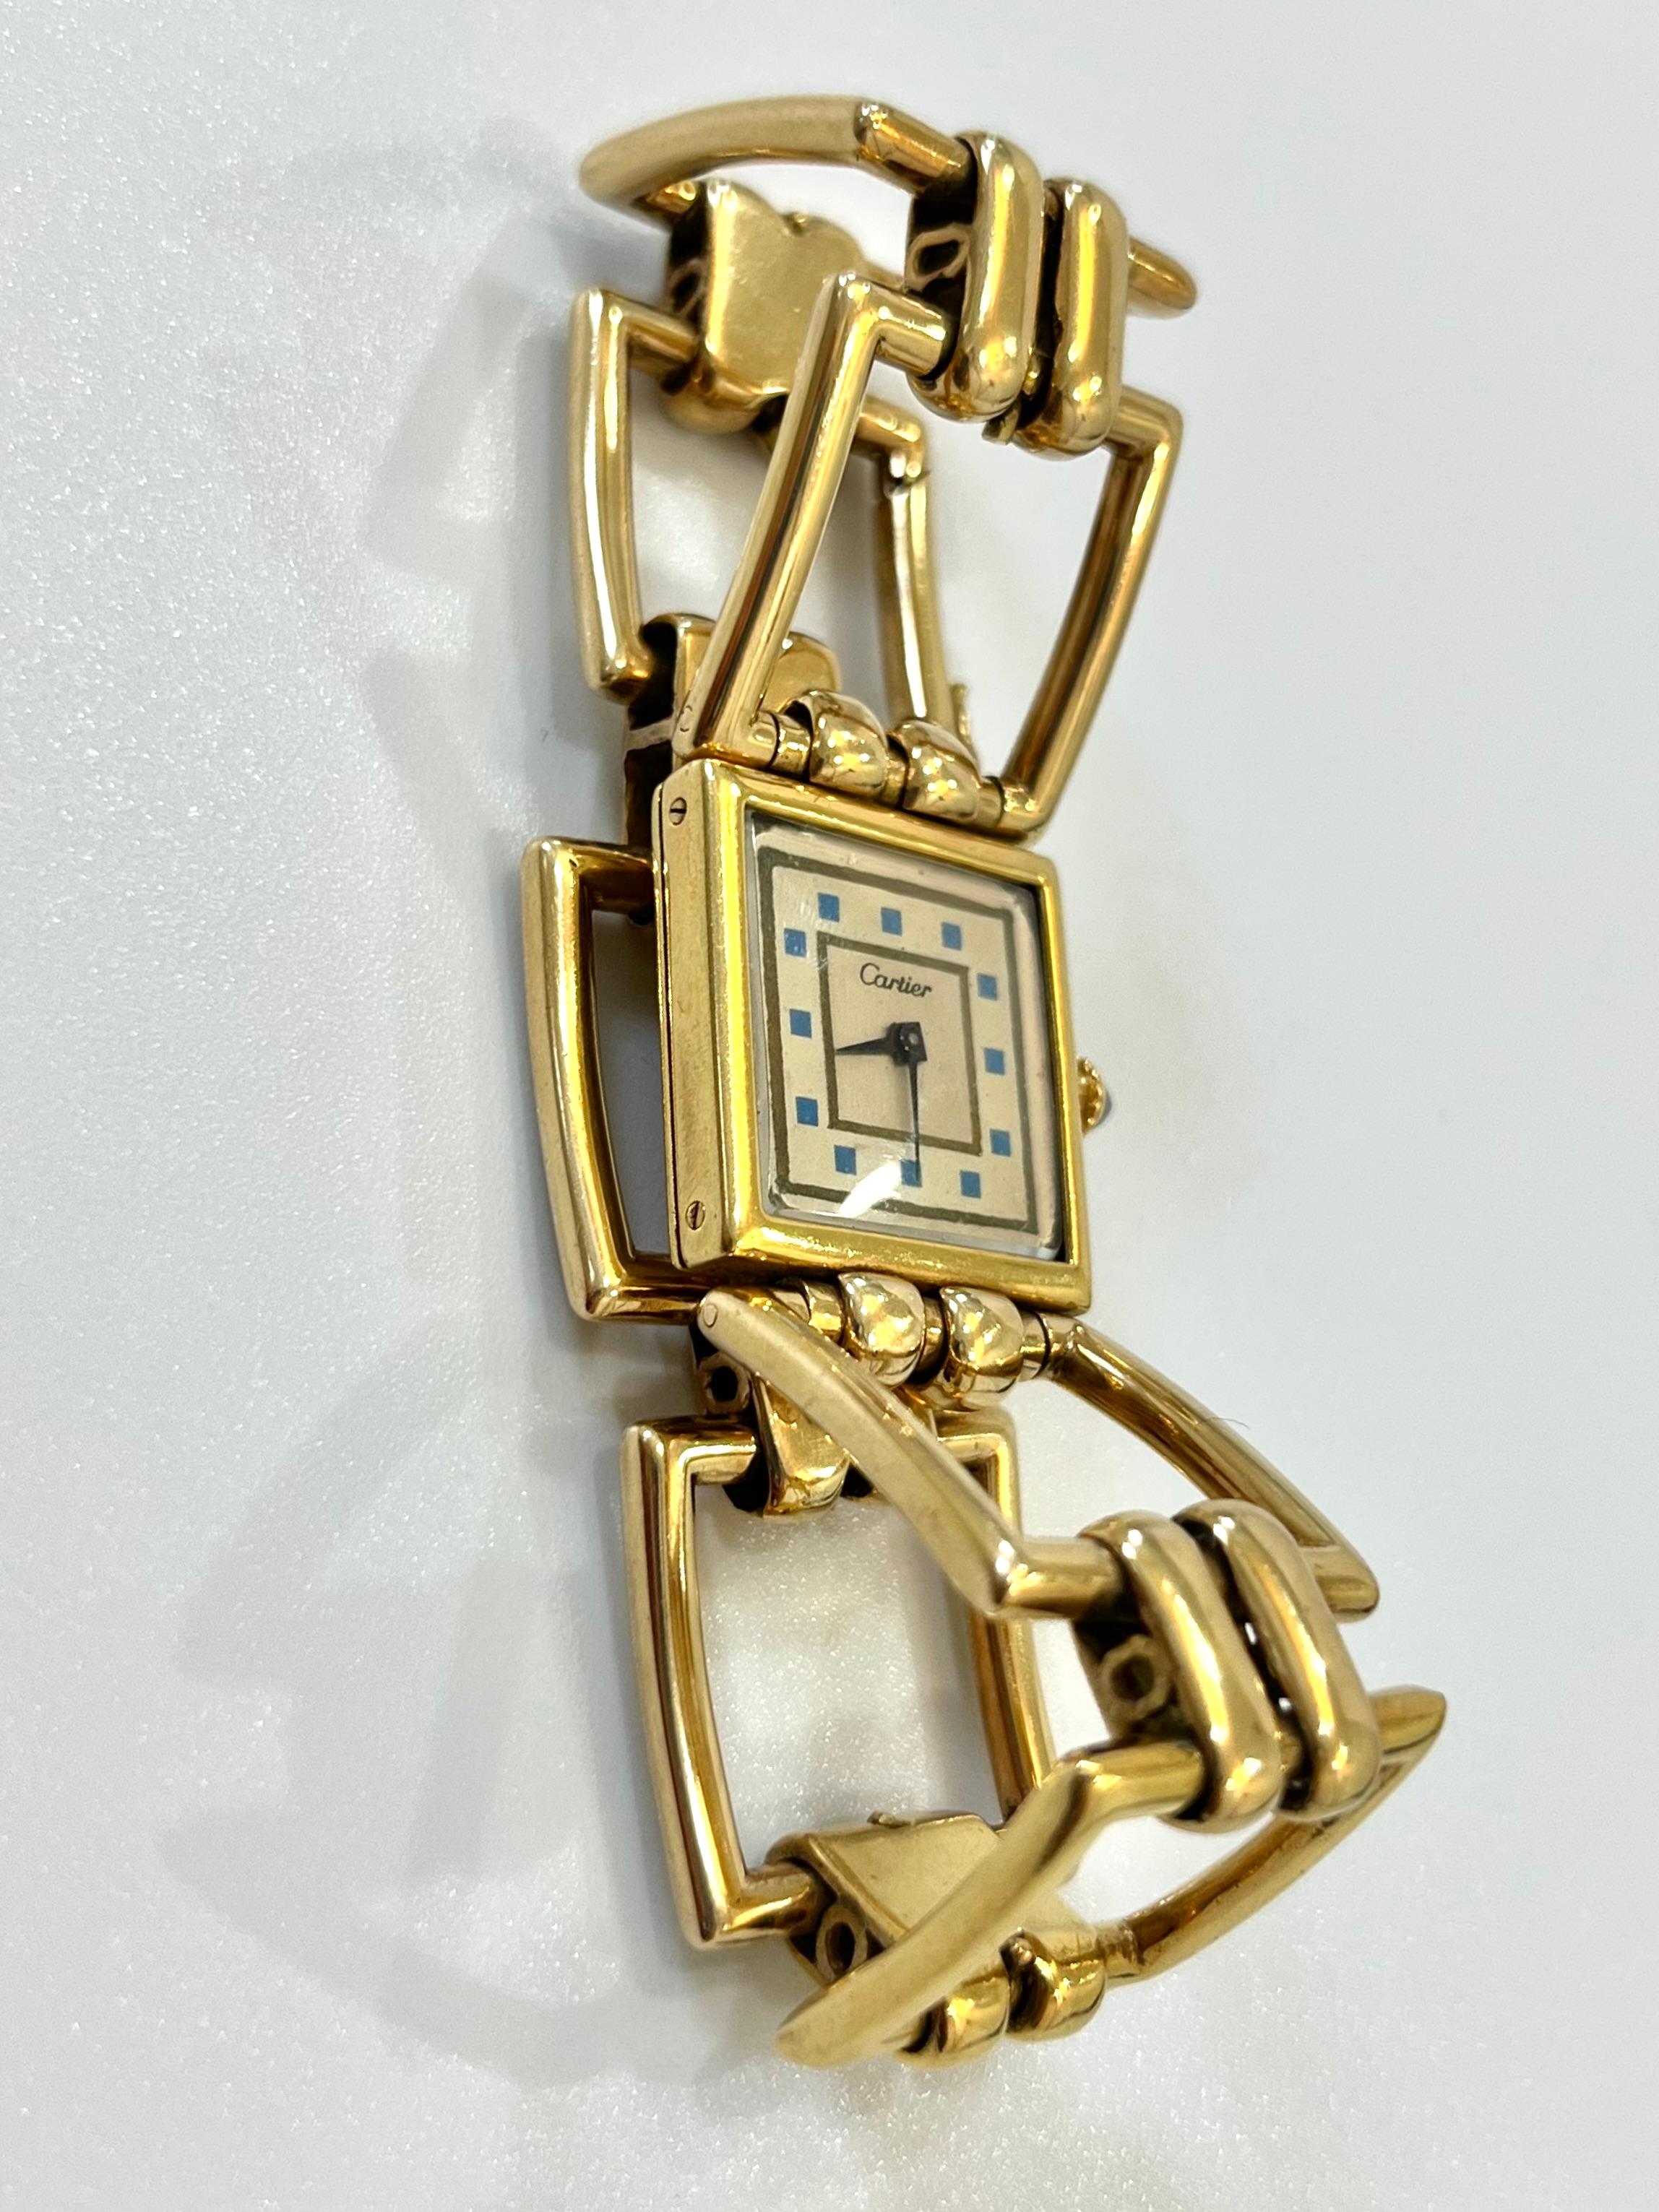 Art Deco Vintage Cartier Square Link Watch in 14k gold - 21mm - Laides Cartier Watch